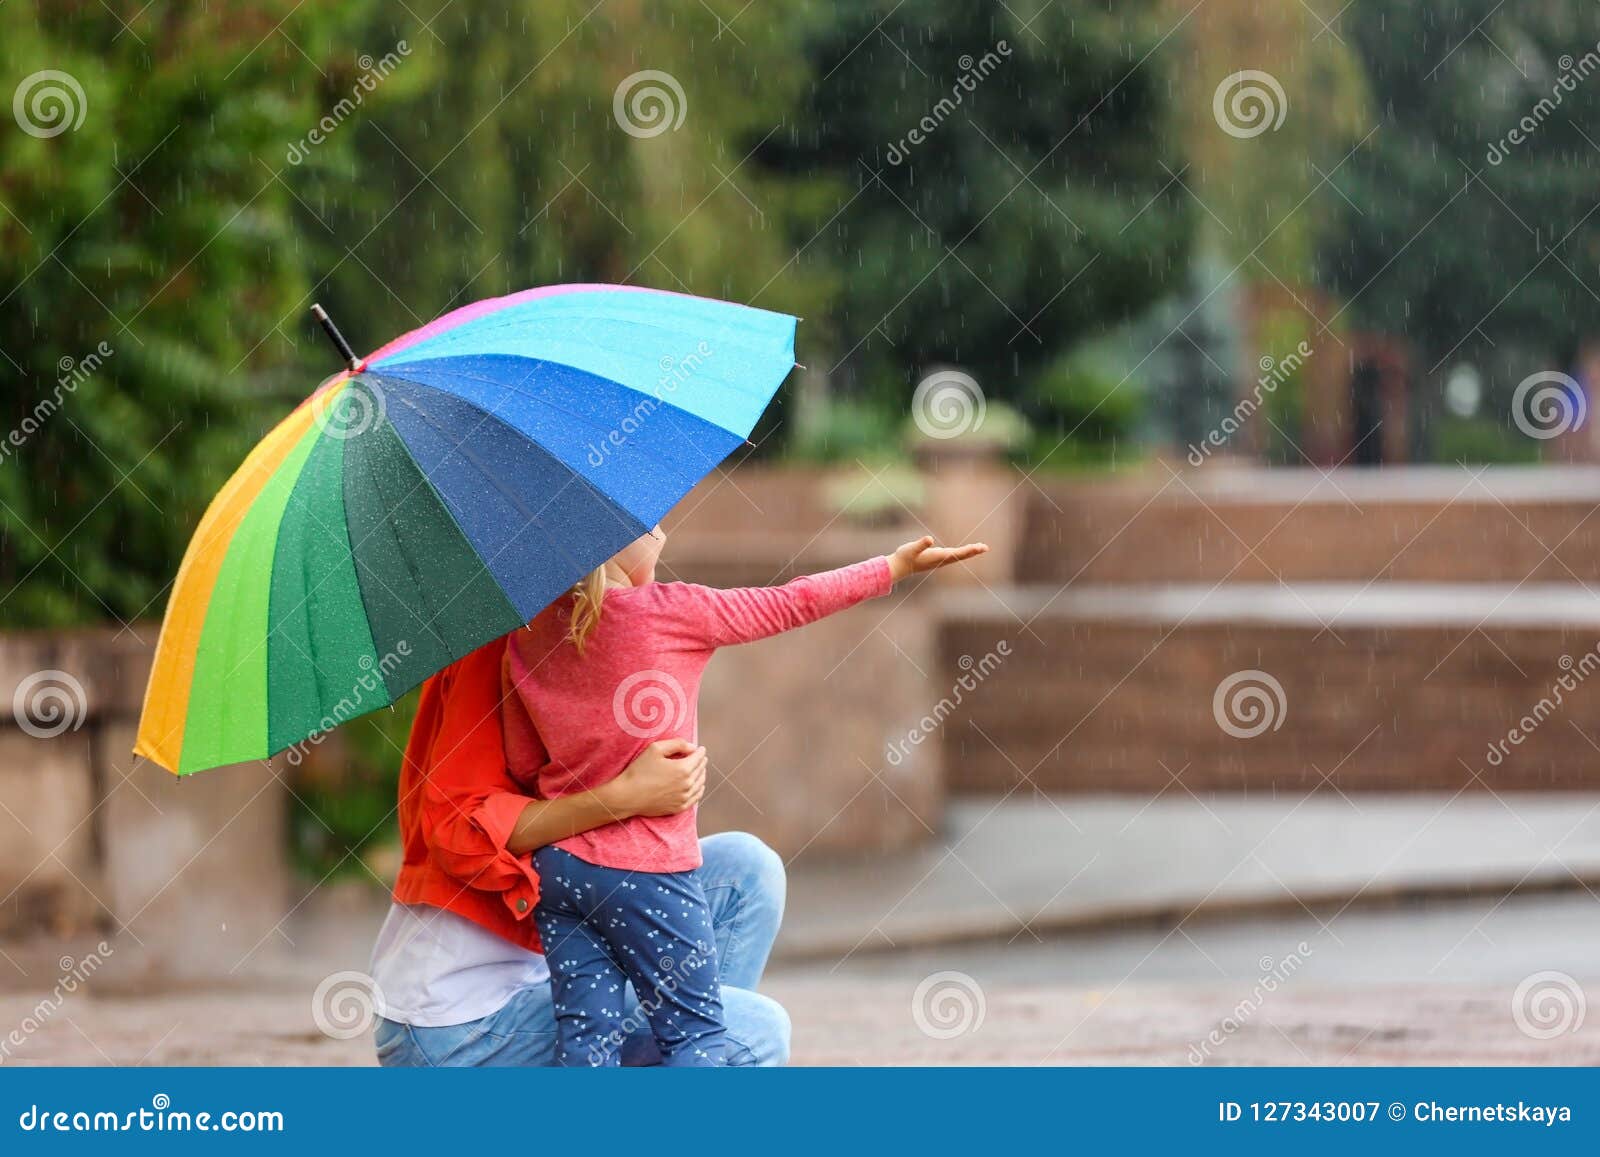 Mother and Daughter with Bright Umbrella Under Rain Stock Image - Image ...